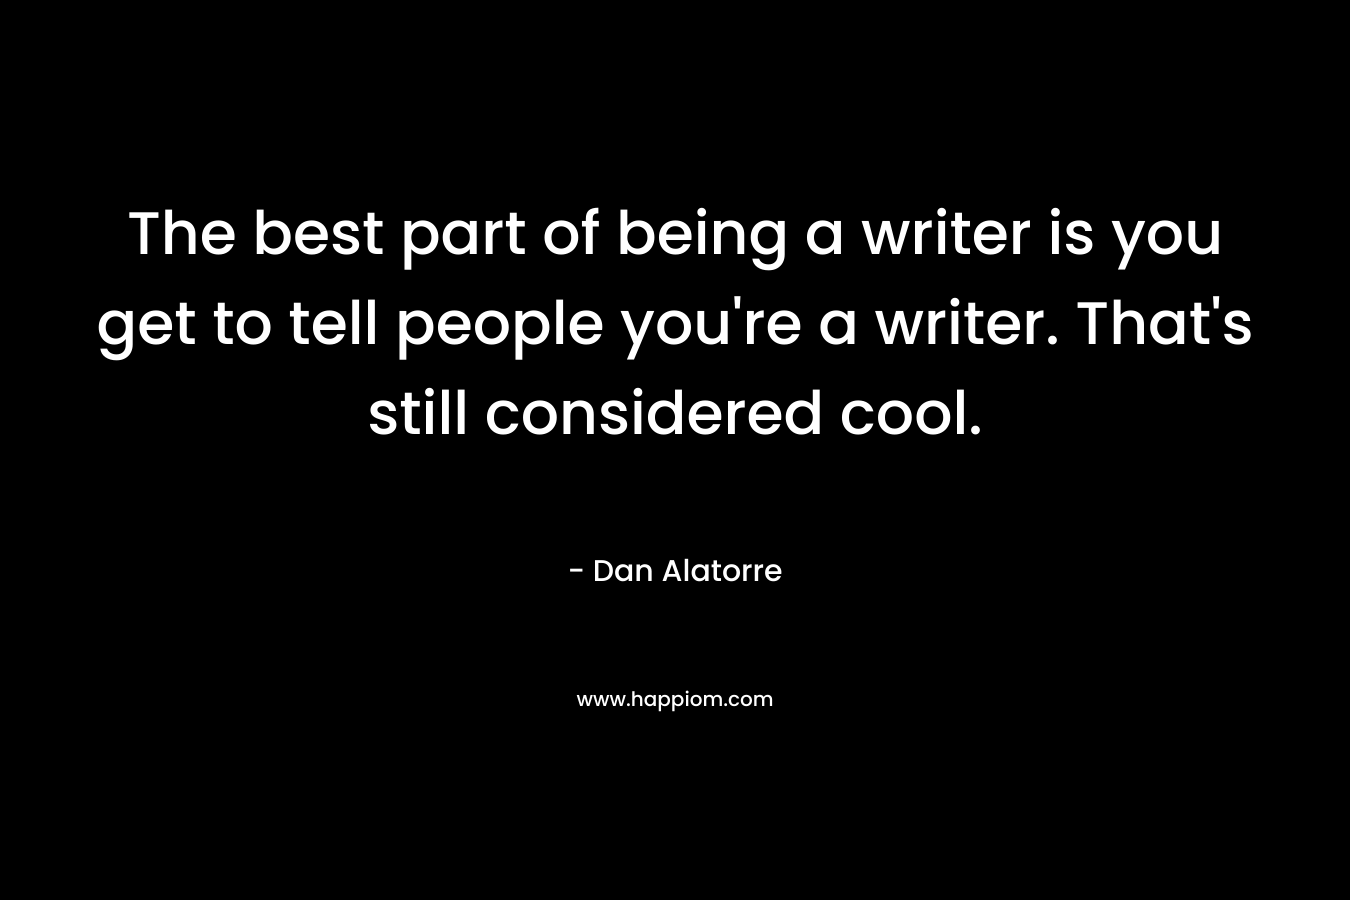 The best part of being a writer is you get to tell people you’re a writer. That’s still considered cool. – Dan Alatorre